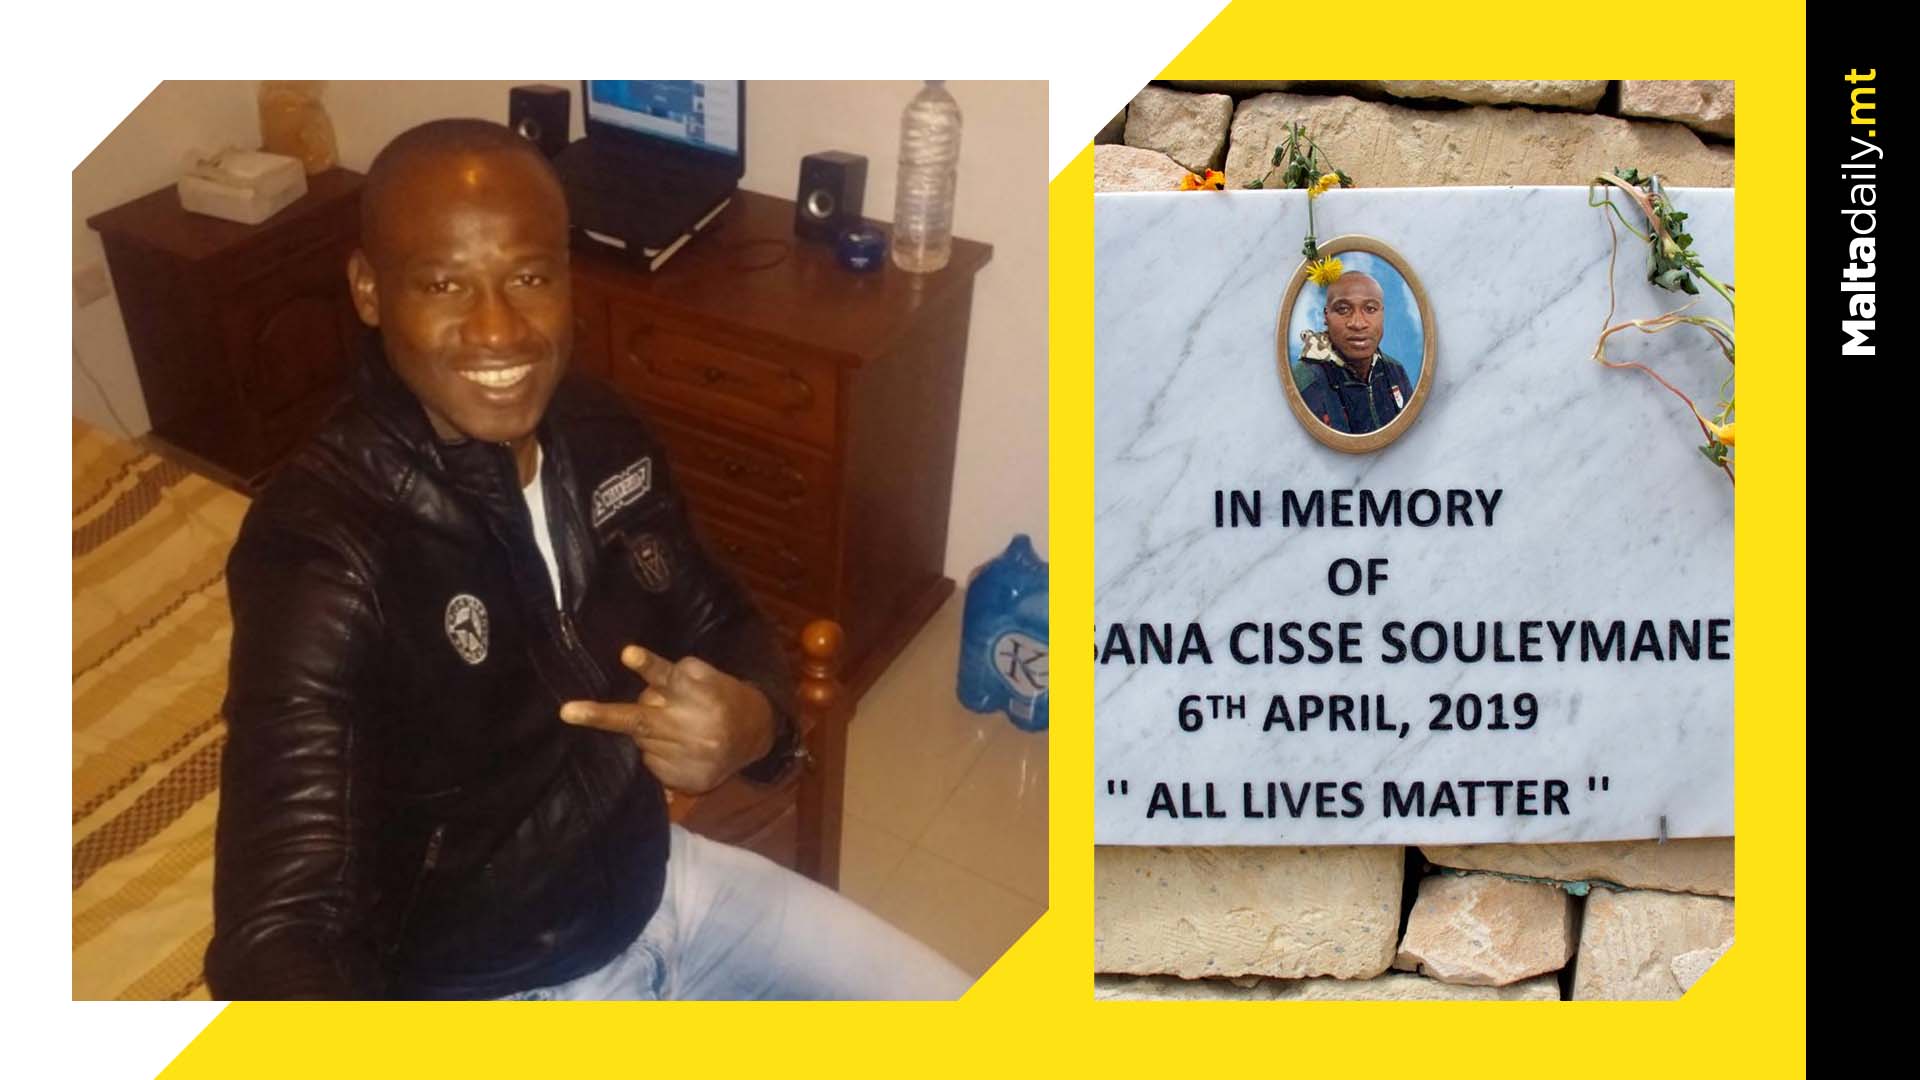 Lassana Cisse's loved ones still awaiting justice 4 years on